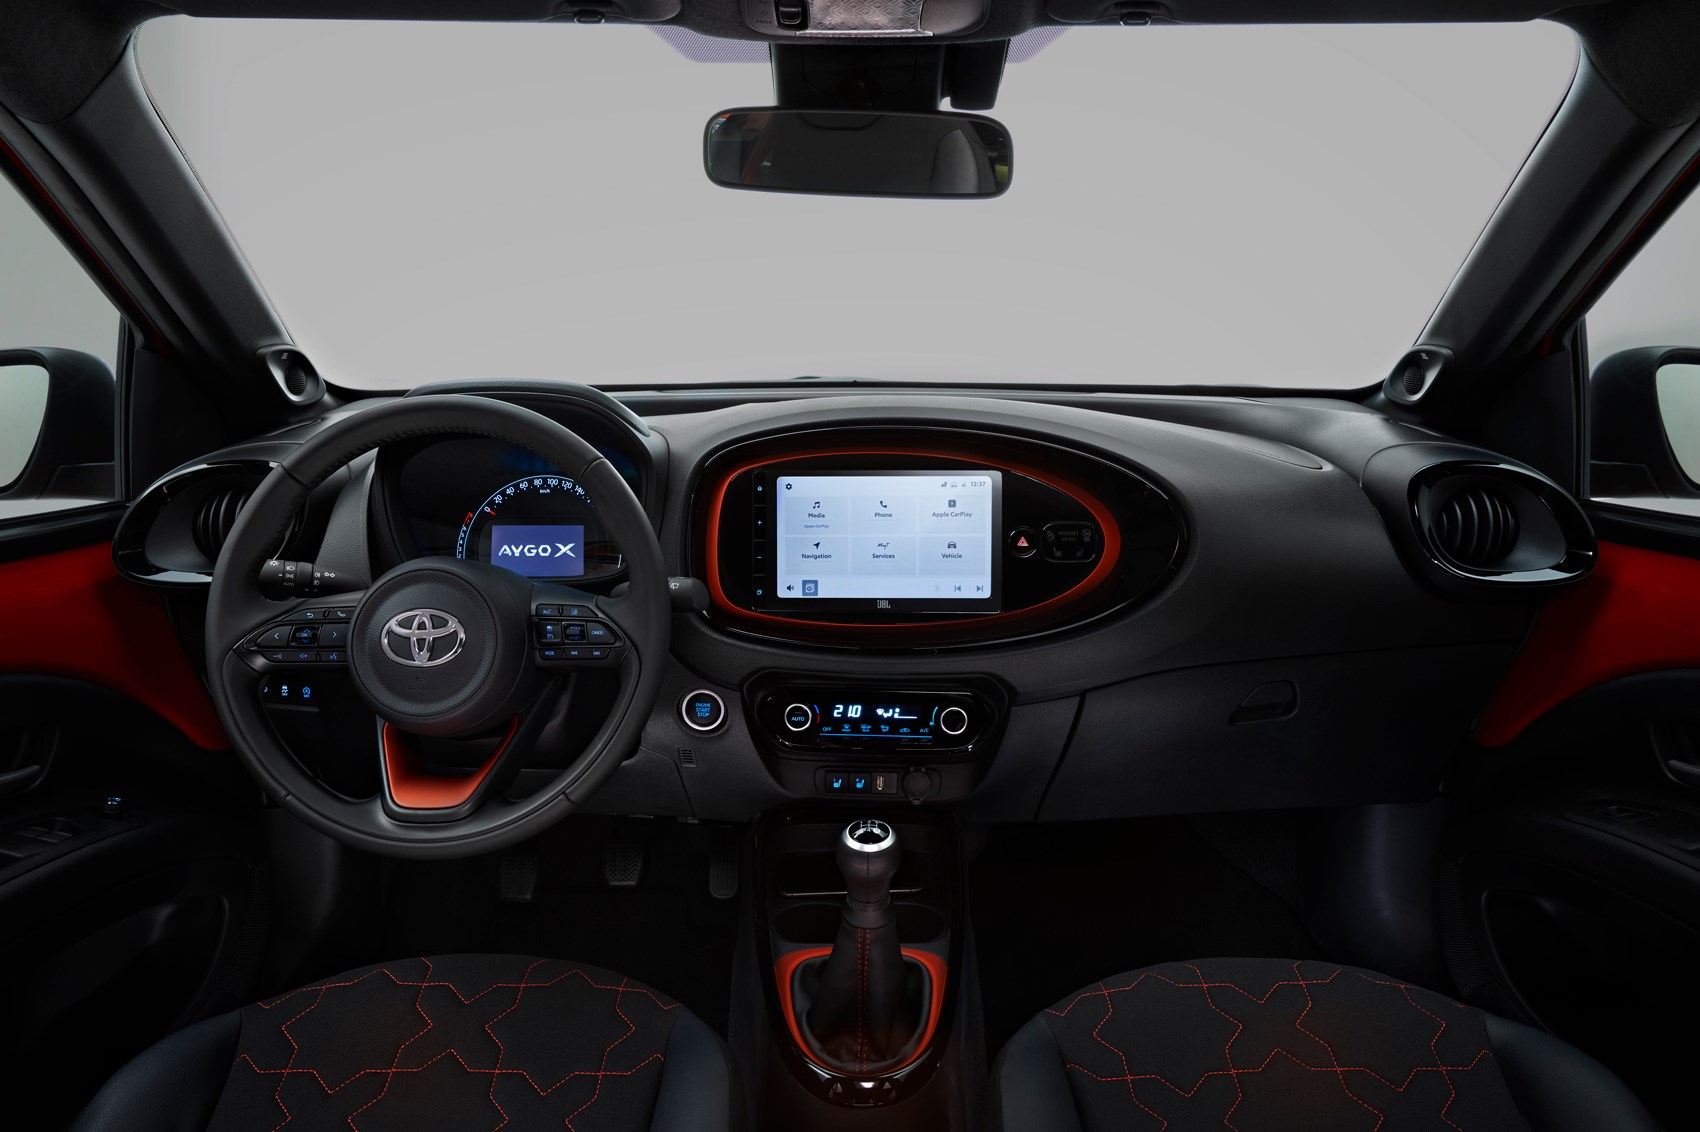 This is the production version of the Toyota Aygo X